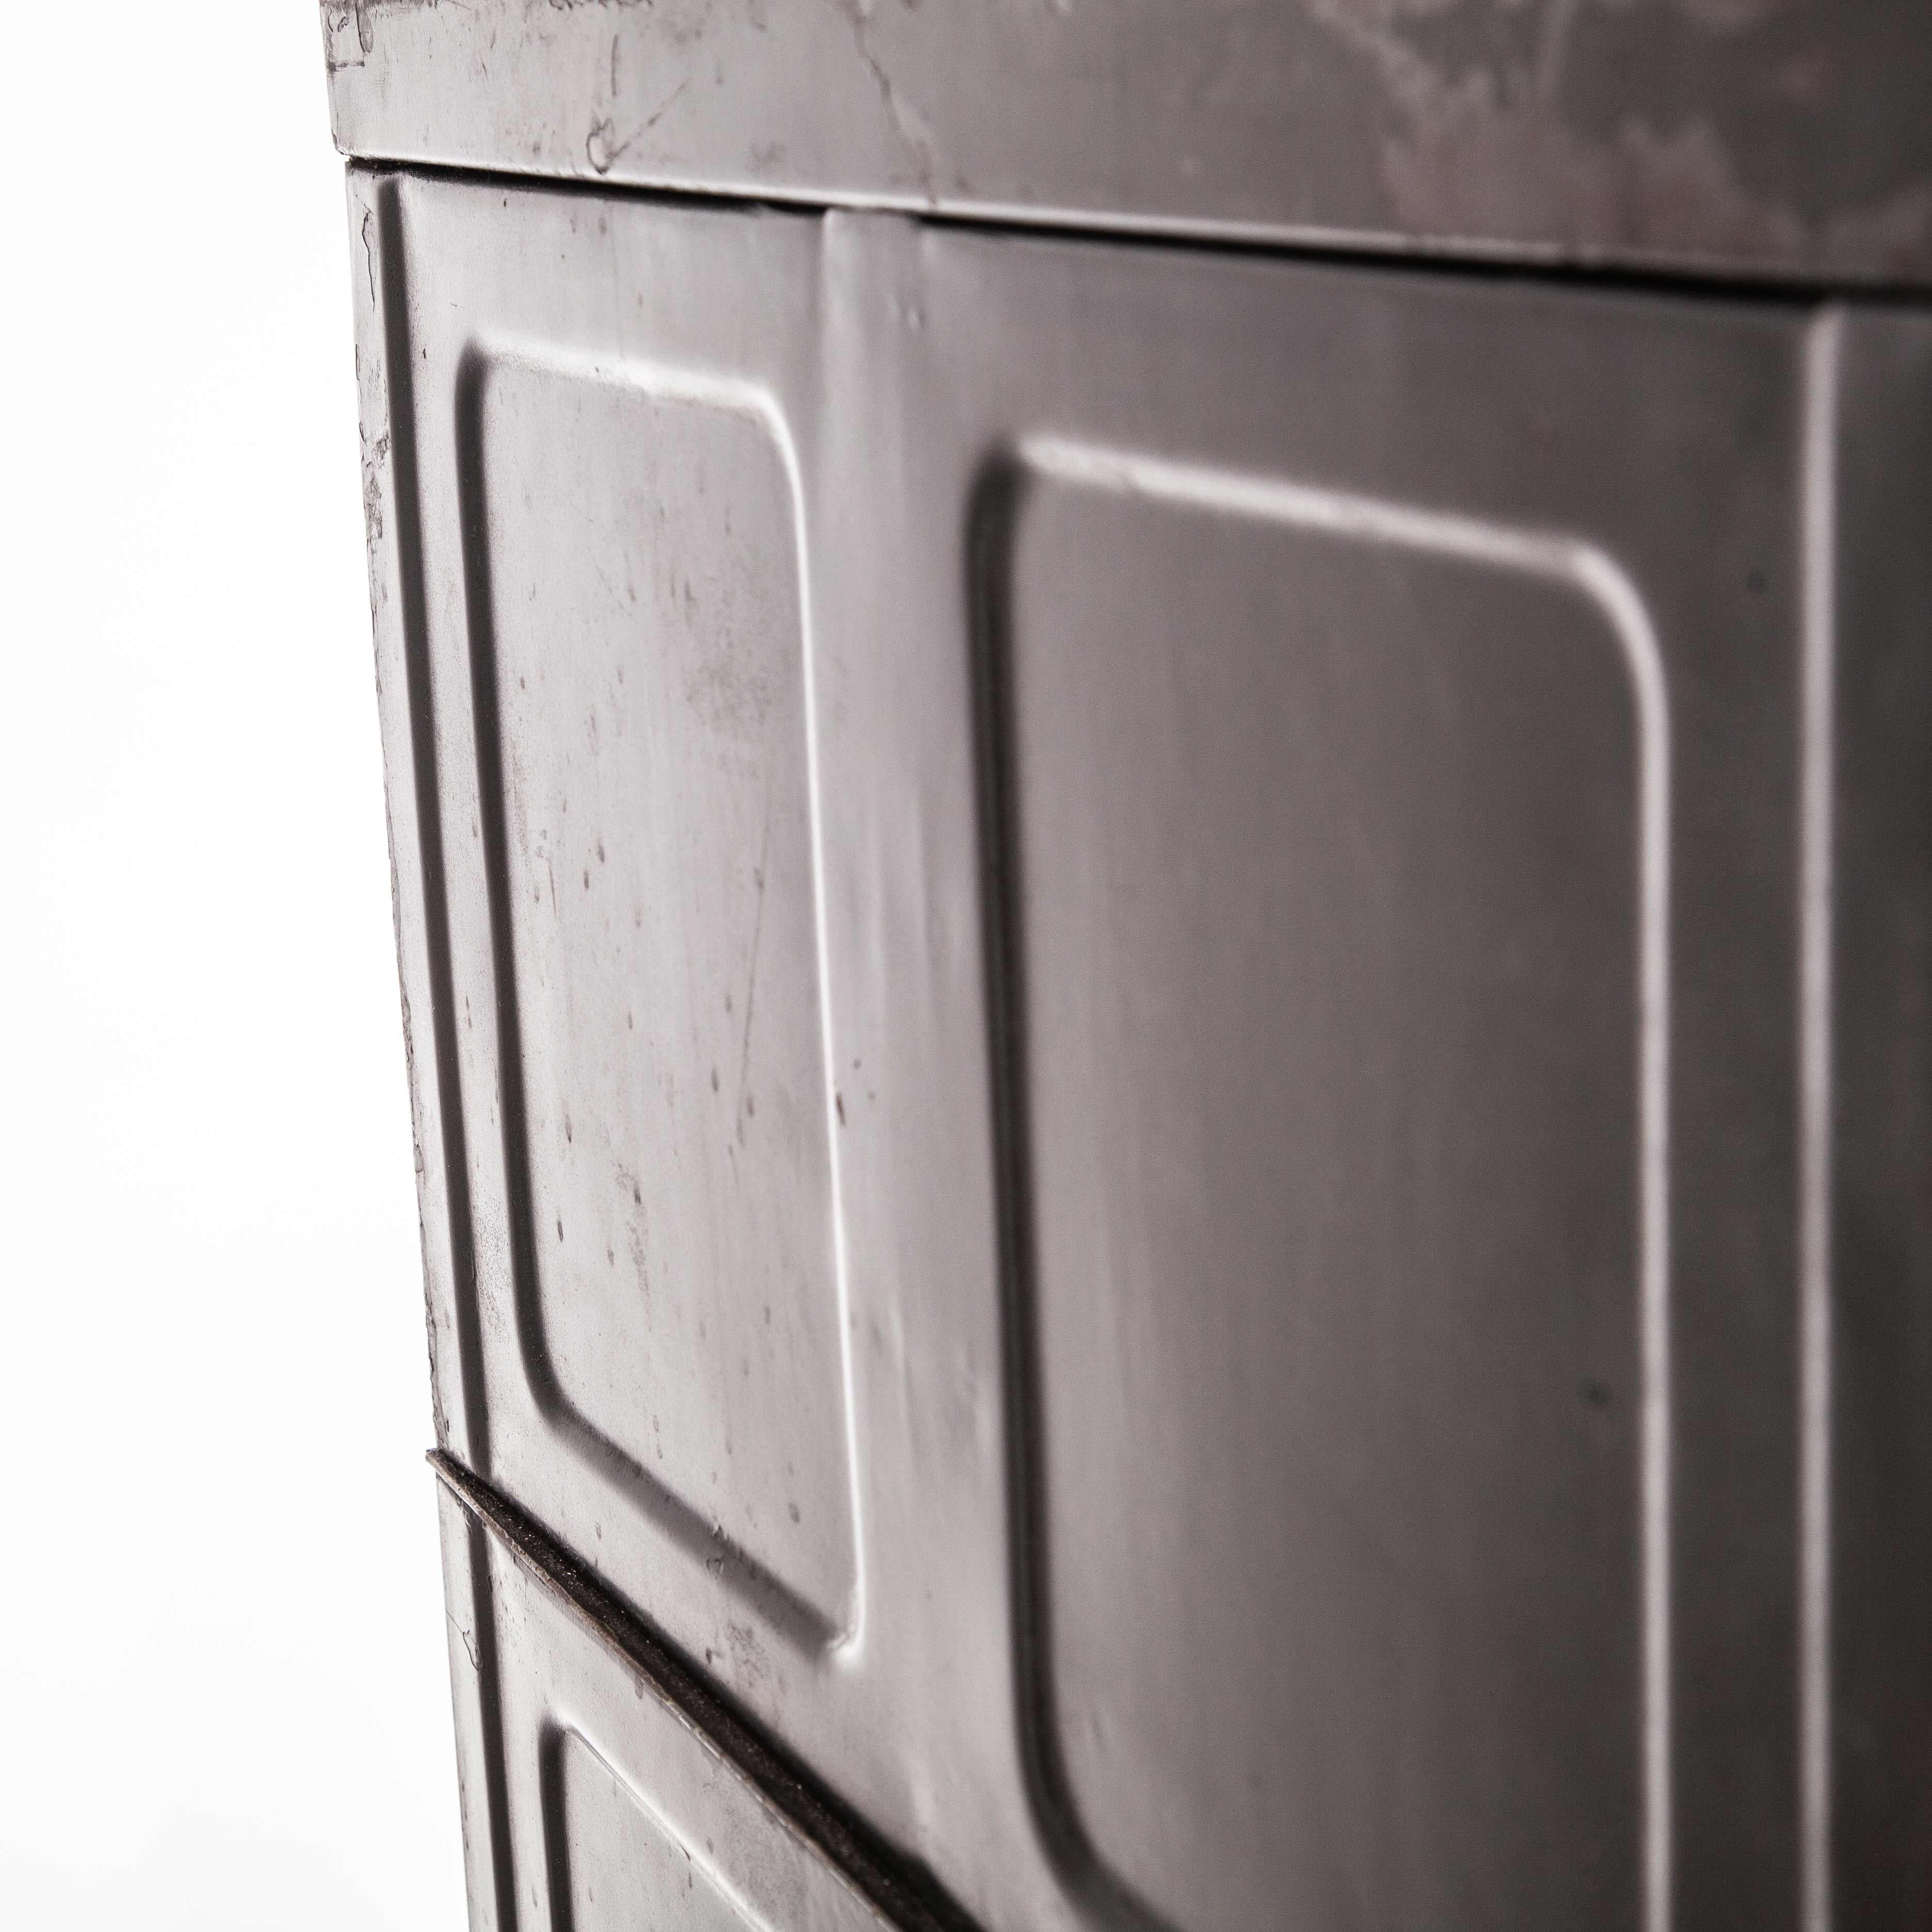 1920s Paneled Sheet Metal Filing Cabinet, Chest Of Drawers 6